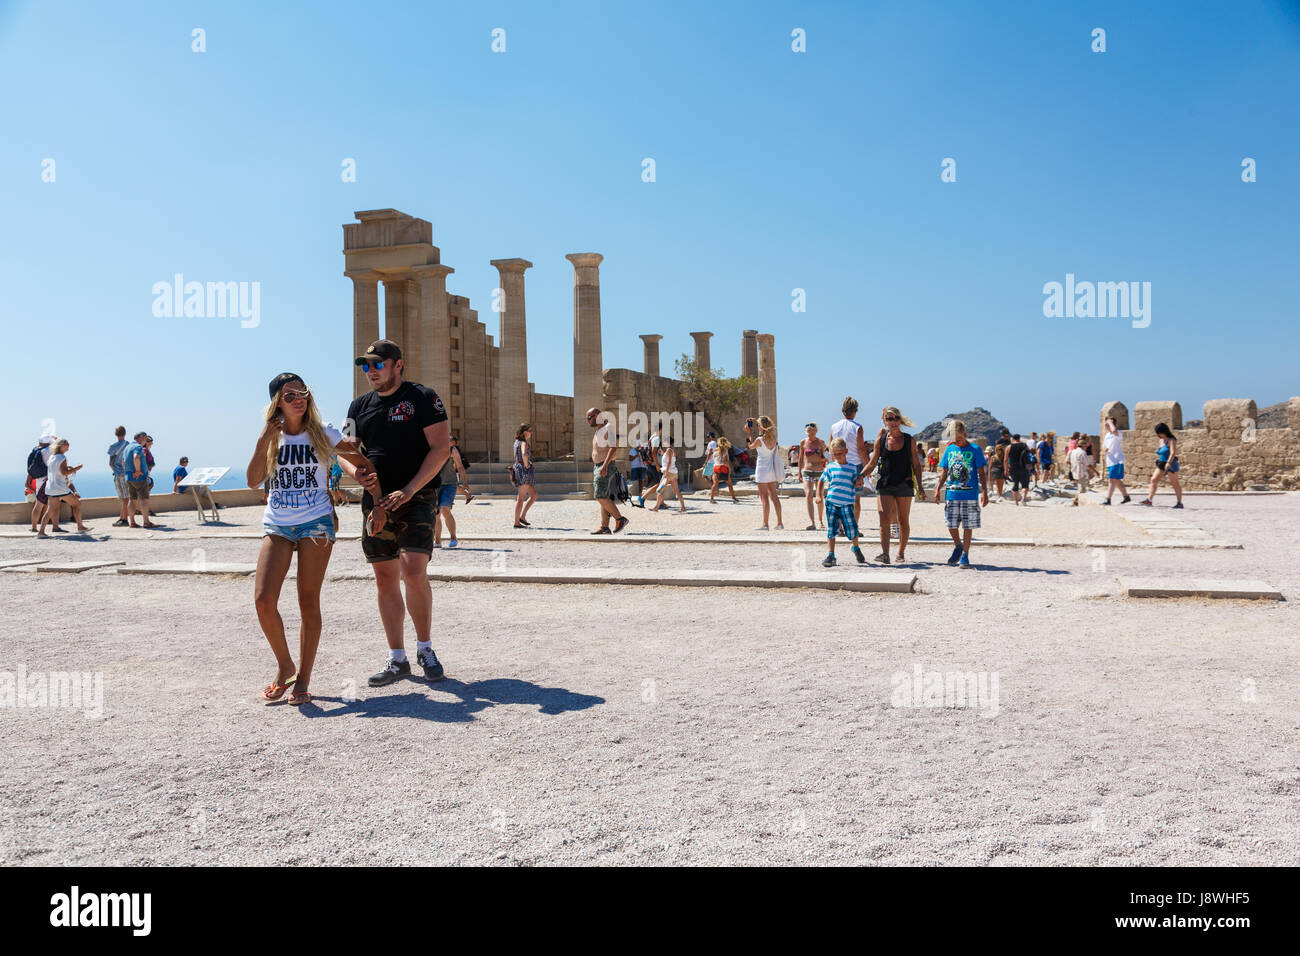 LINDOS, RHODES ISLAND, GREECE - September 3, 2015:  People visiting the ruins of a Doric temple of Athena Lindia on the Acropolis of Lindos, Rhodes, G Stock Photo